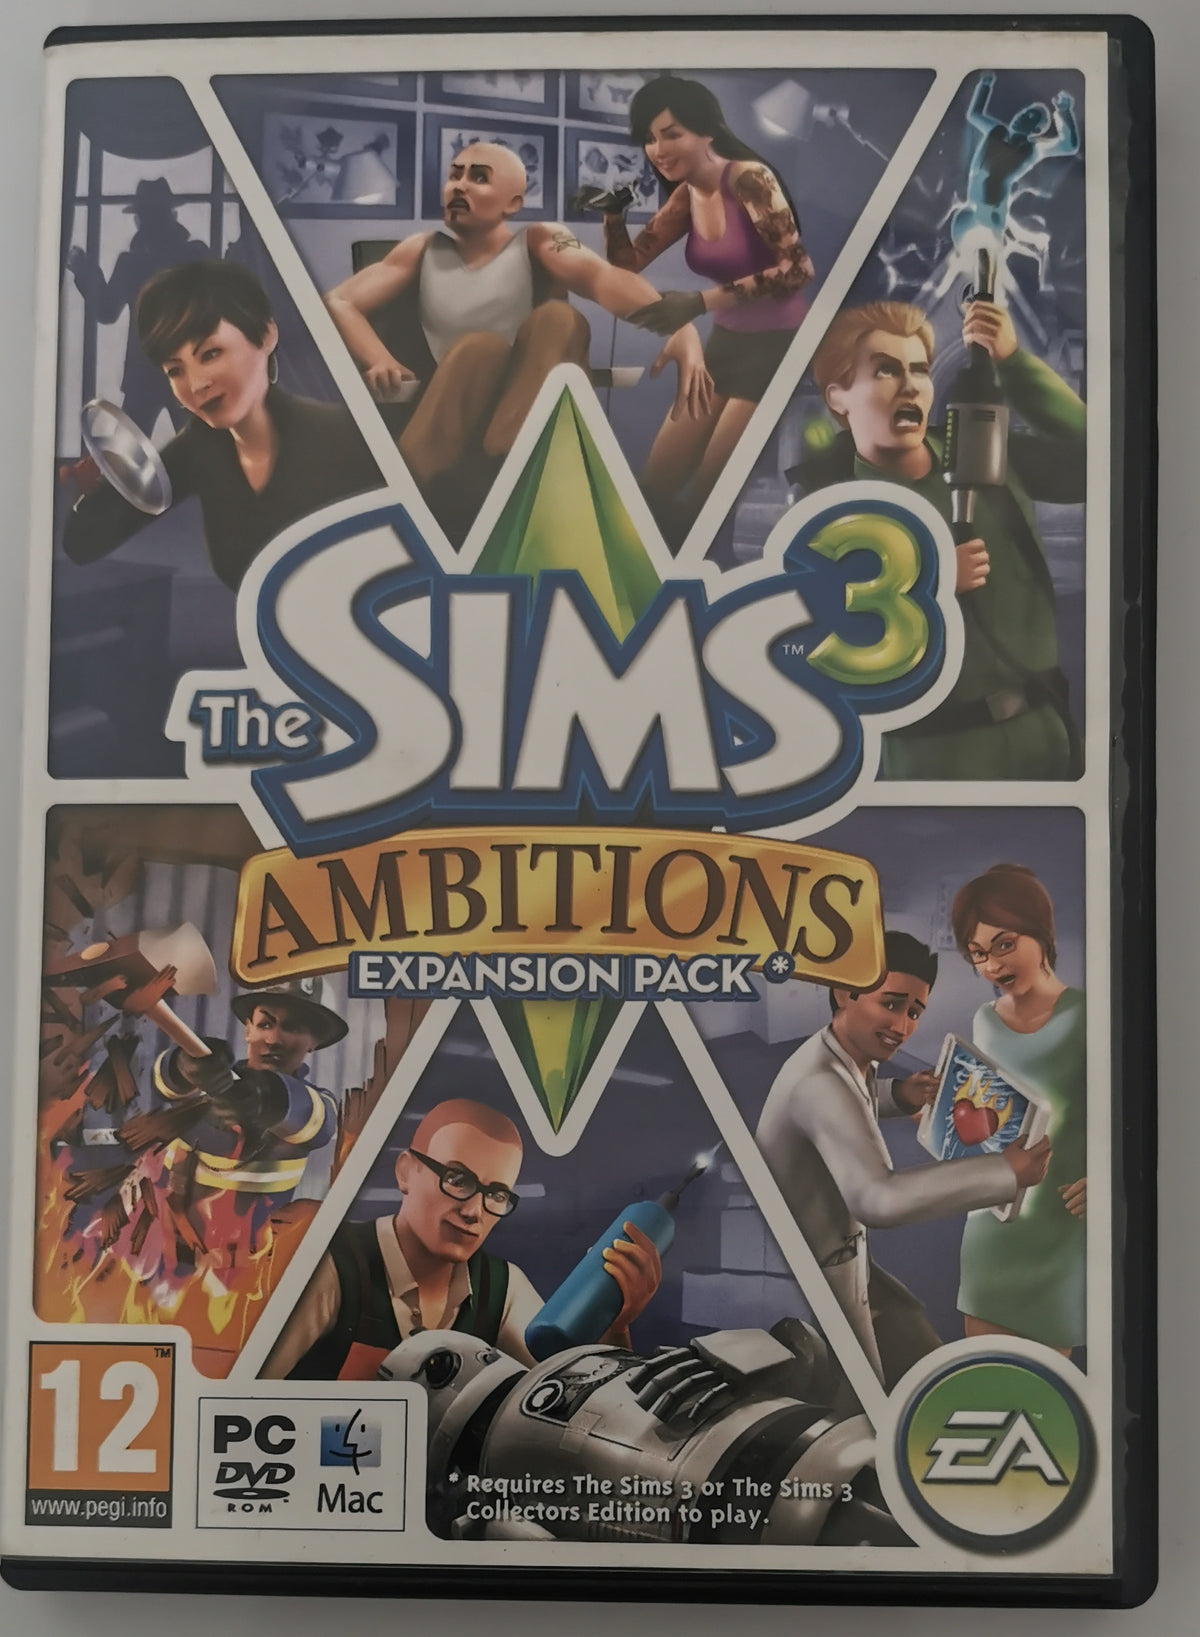 The Sims 3 Ambitions PCMac DVD UKImport (Windows) [Sehr Gut]